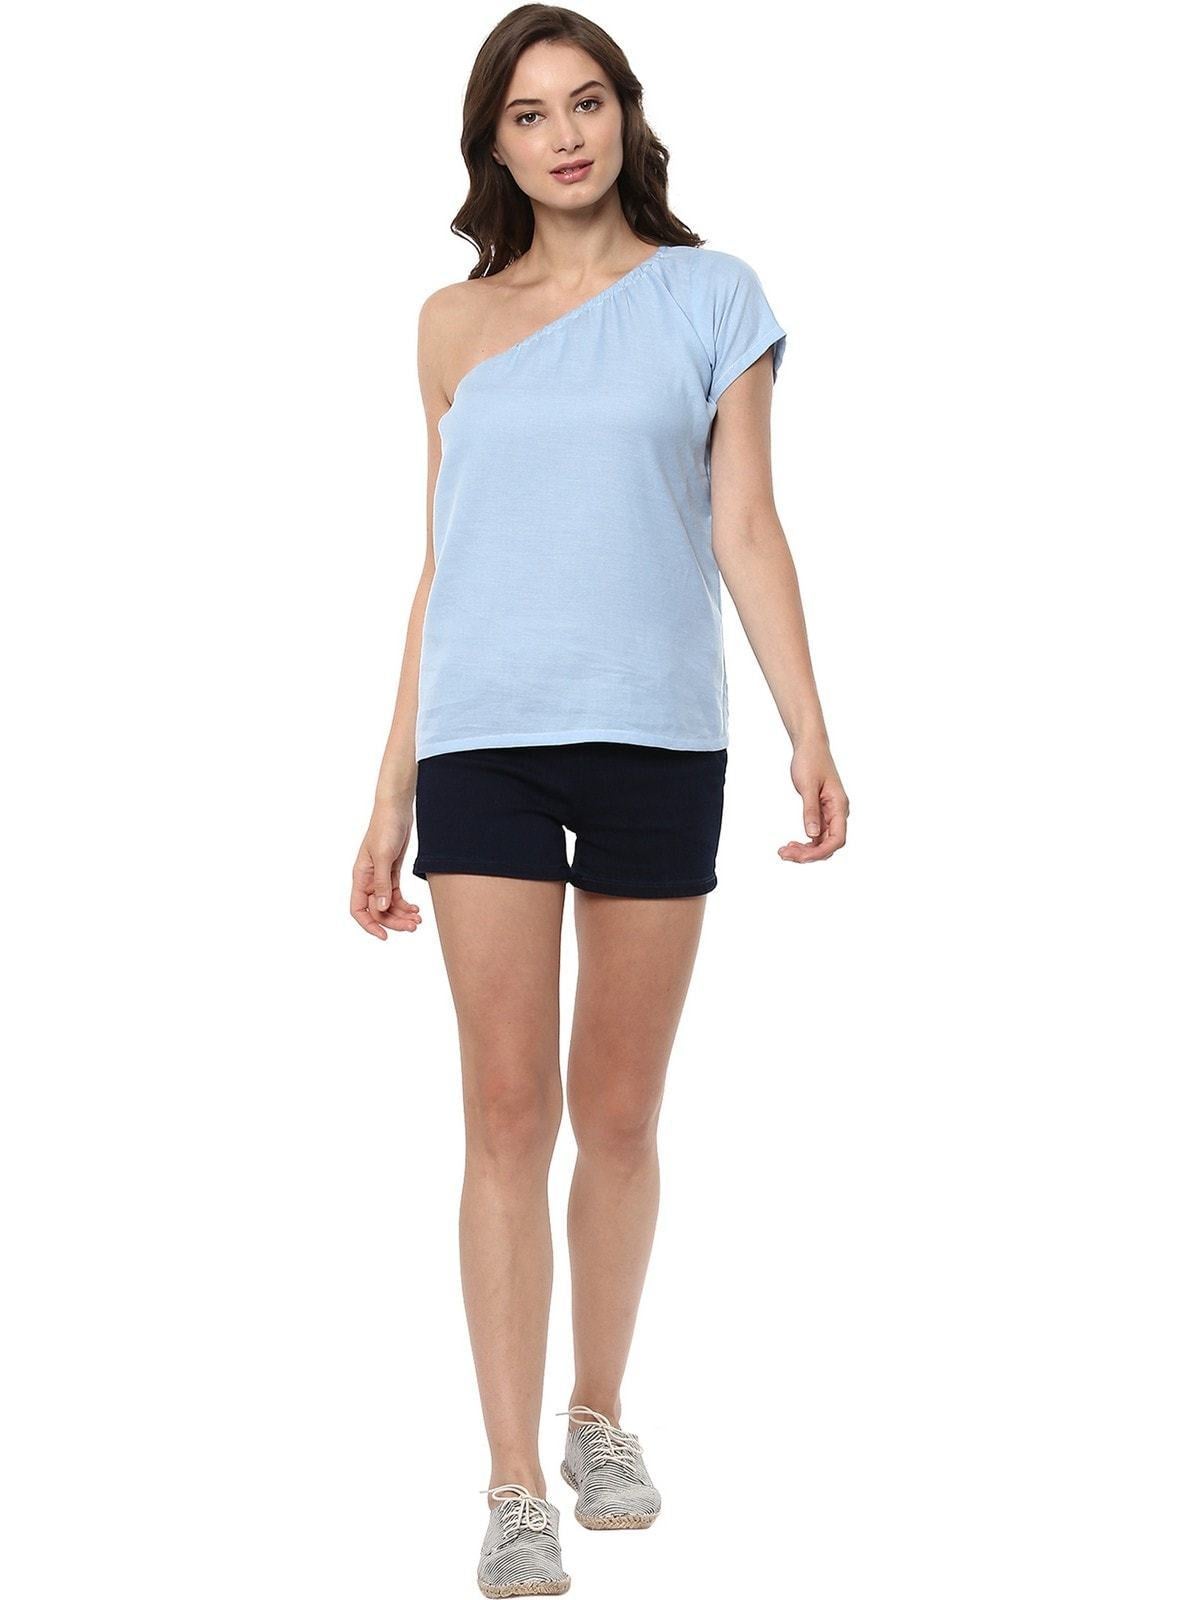 Women's Chambray One-Shoulder Top - Pannkh